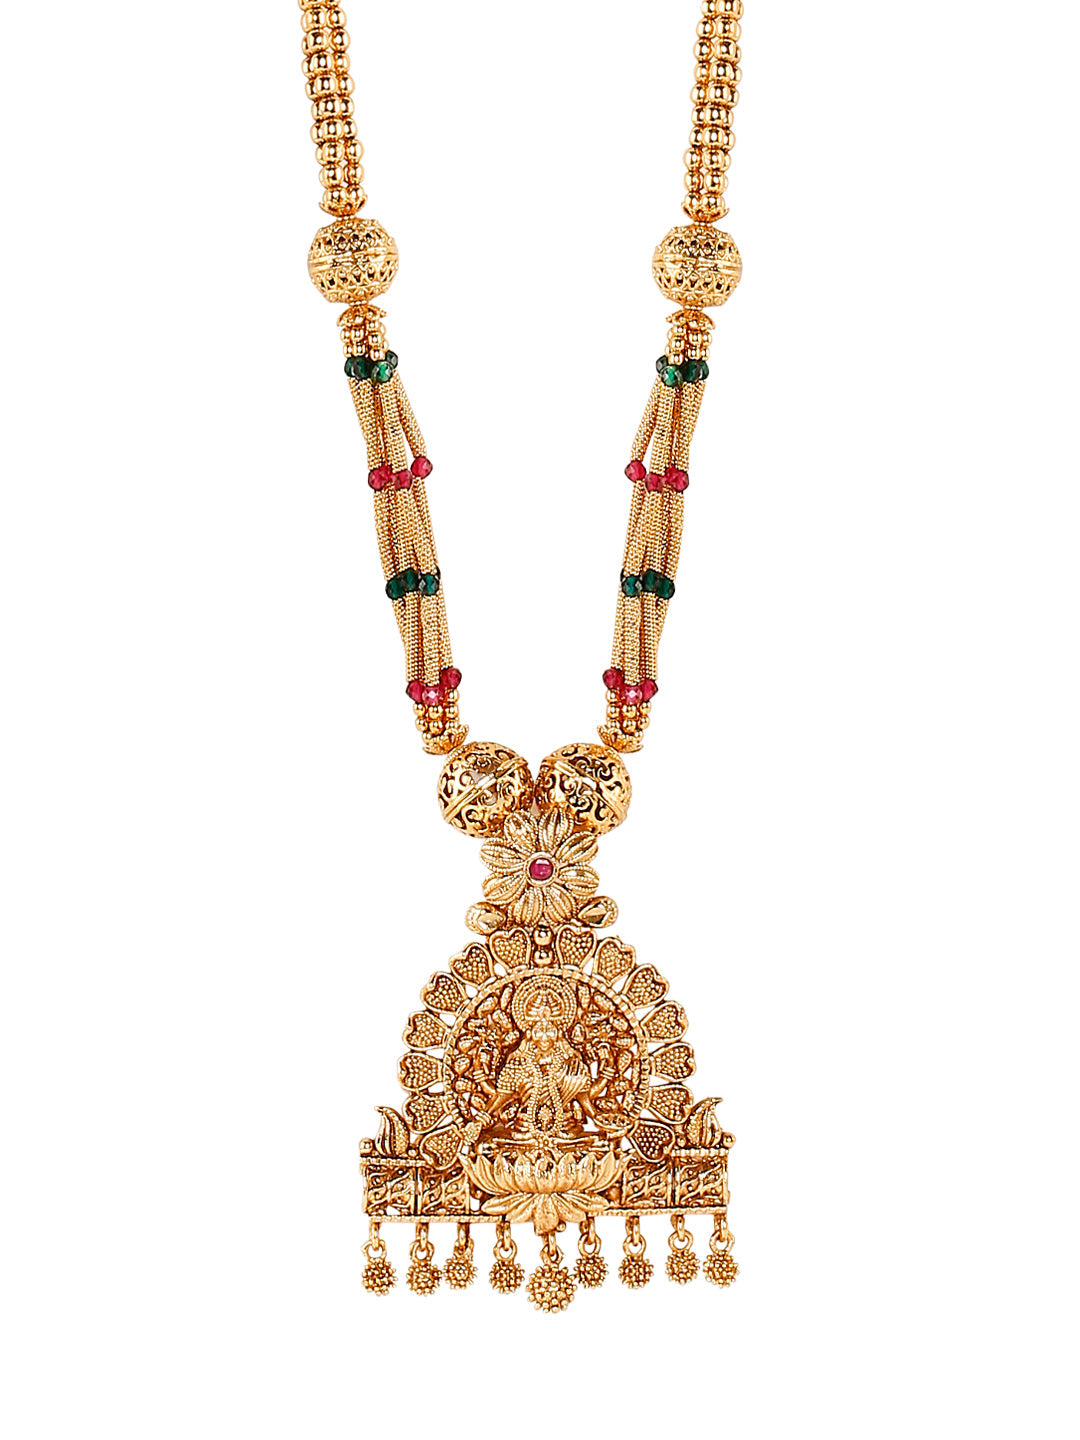 Handcrafted 18K Antique Gold Plated Godess Lakshmi Temple Jewellery Necklace With Matching Earring For Women (SJ_2800)